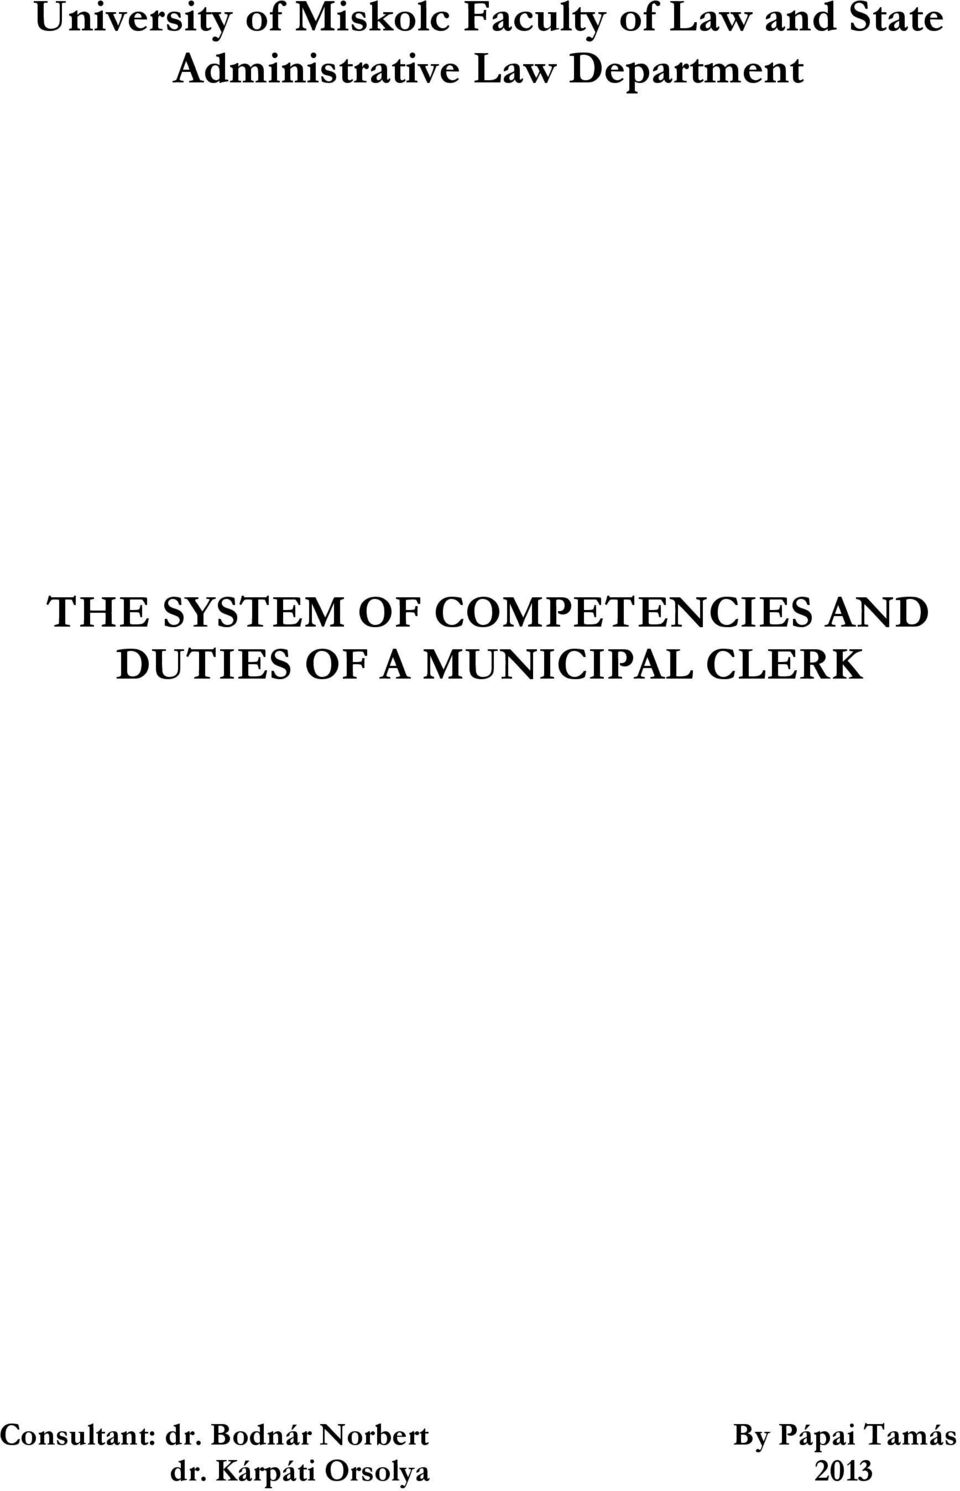 COMPETENCIES AND DUTIES OF A MUNICIPAL CLERK